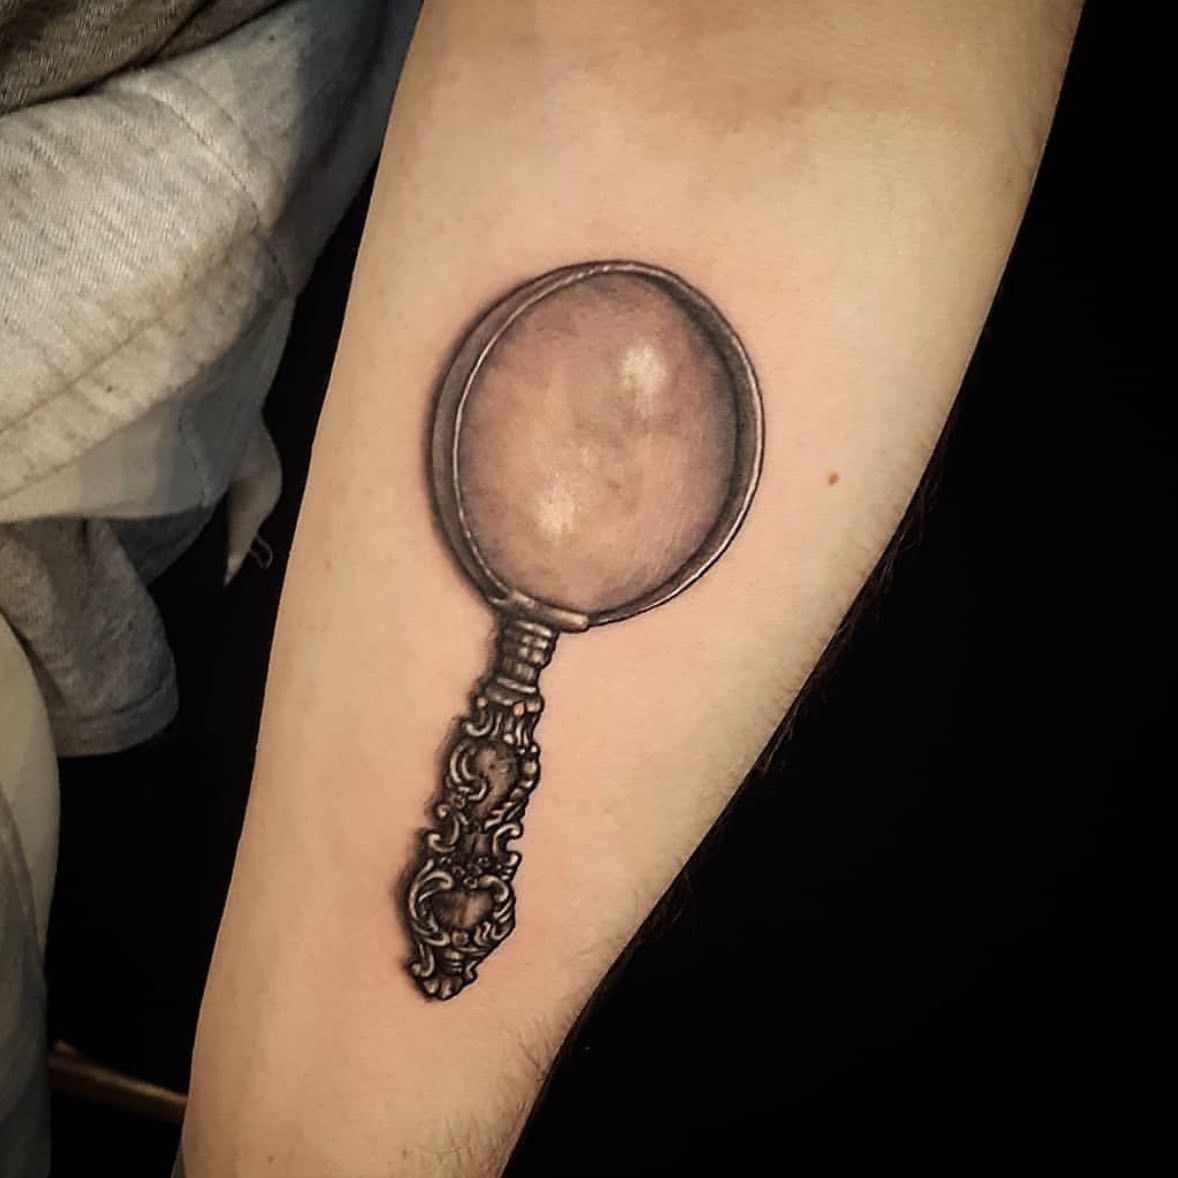 Black 3D Magnifying Glass Tattoo on Arm